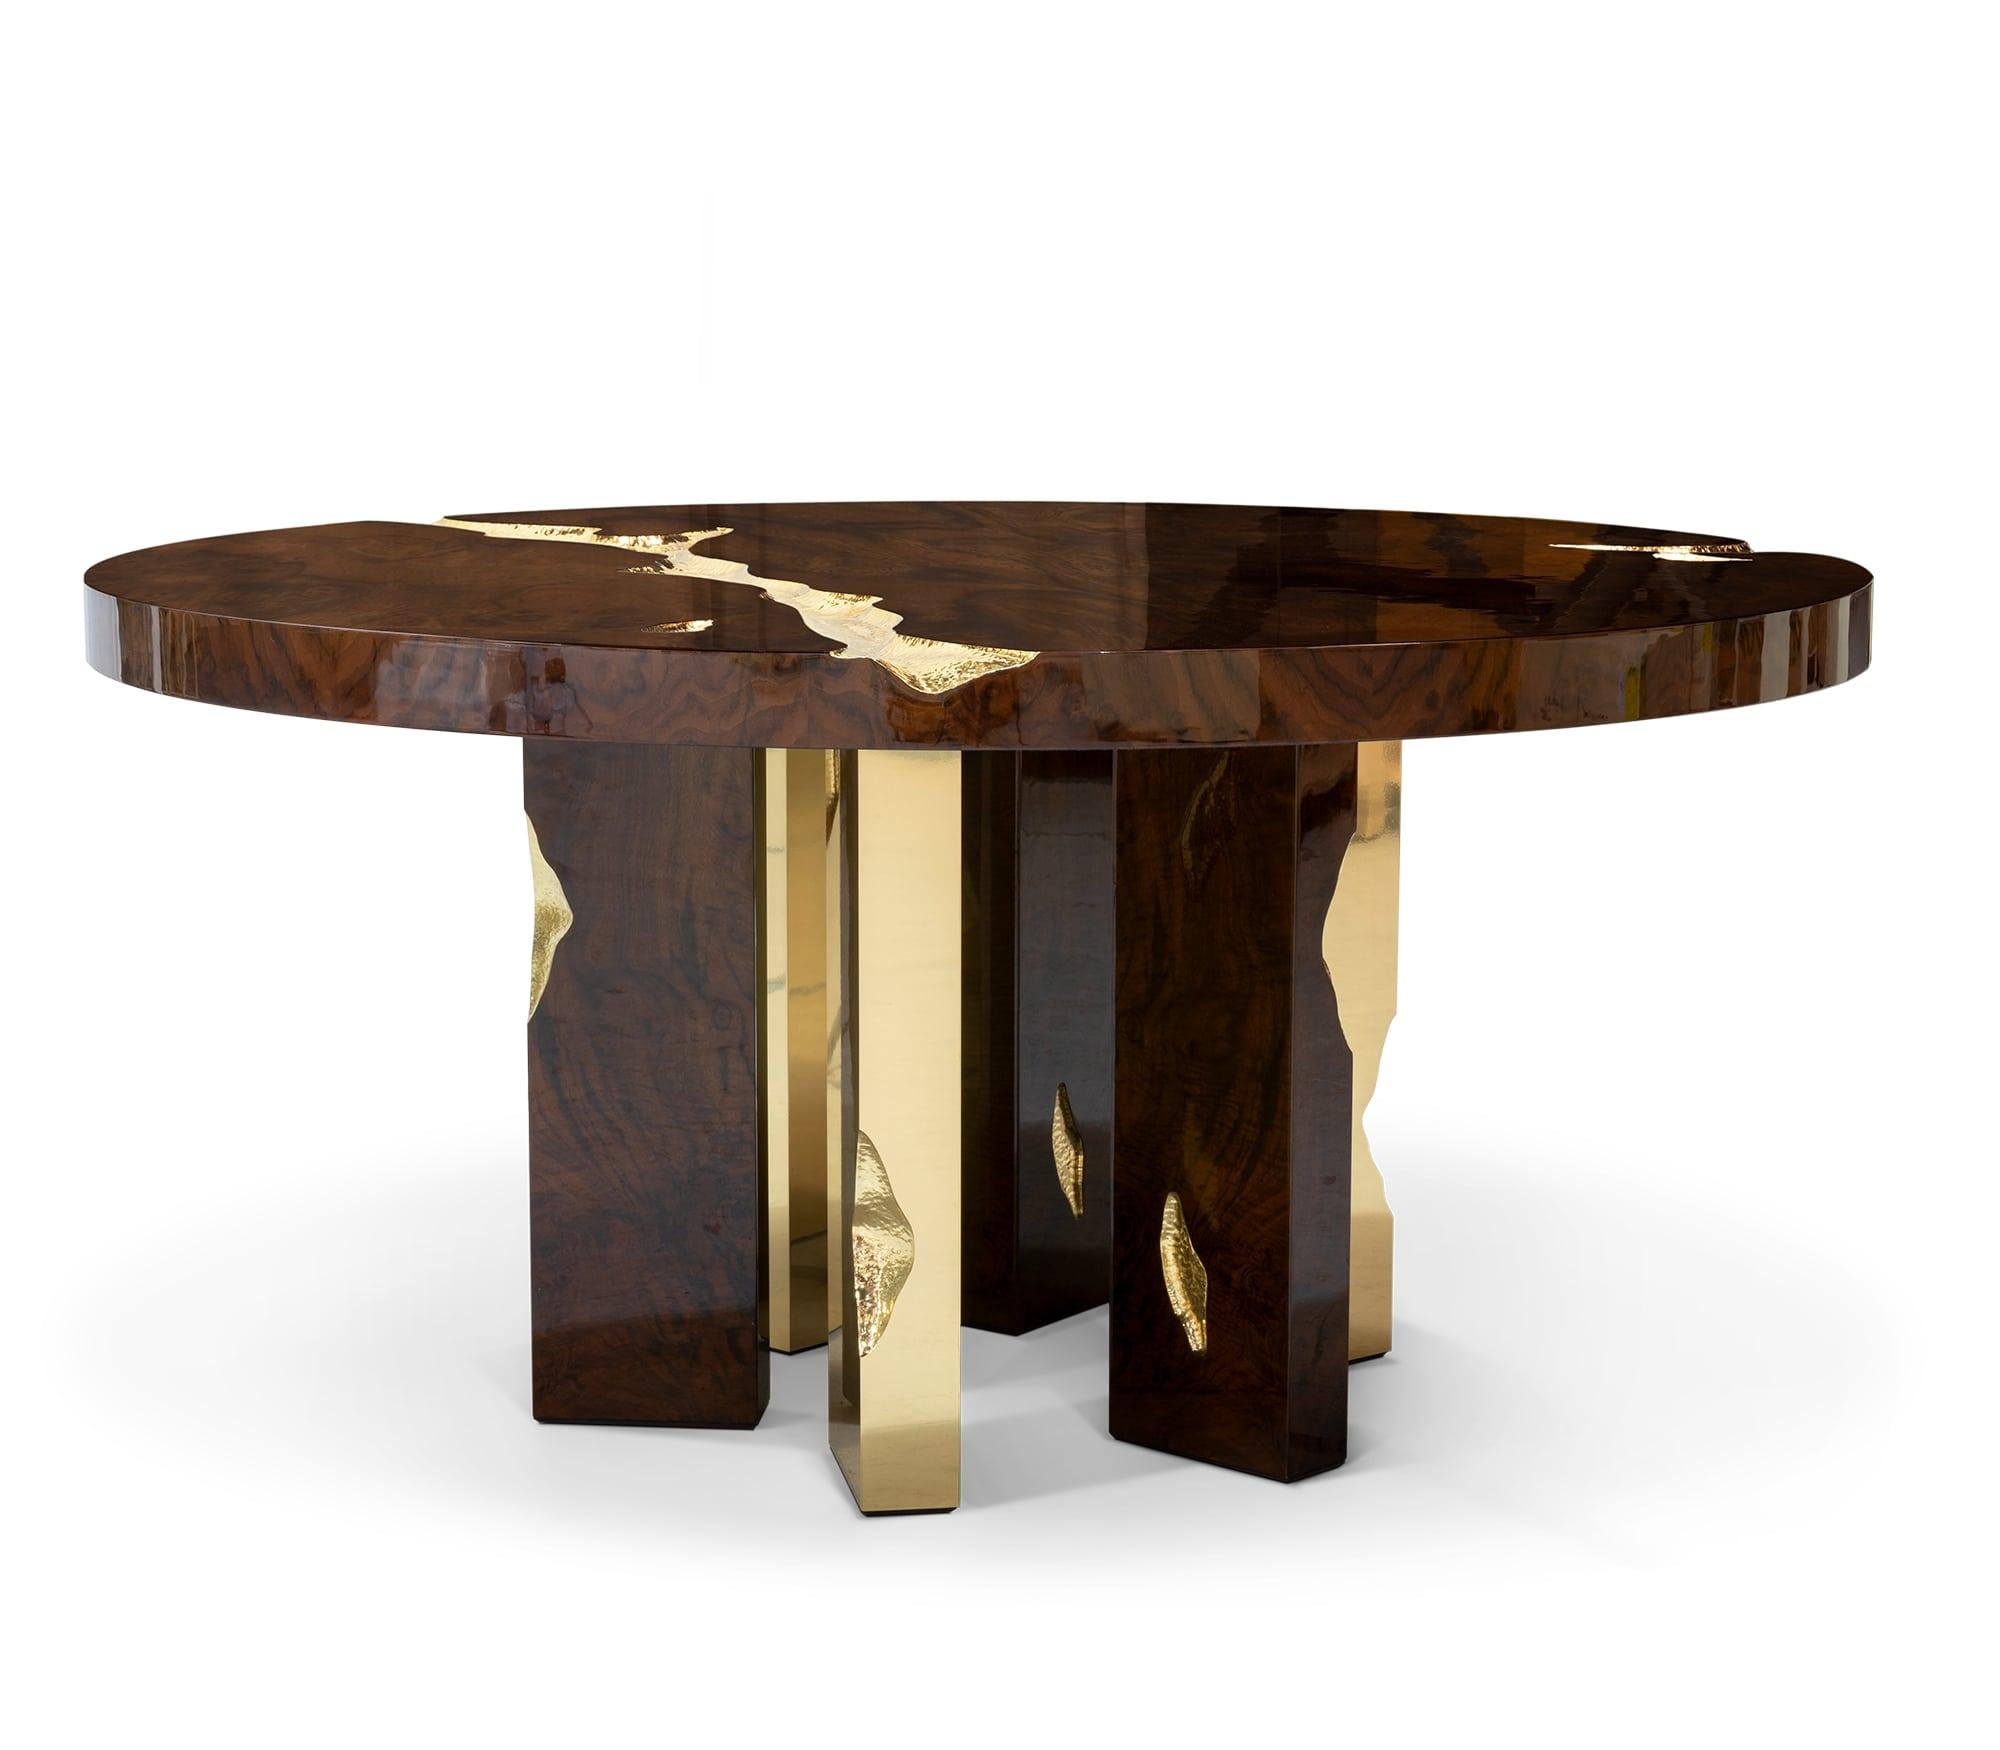 Modern Empire Round Dining Table in Mahogany Wood and Brass Details by Boca Do Lobo For Sale